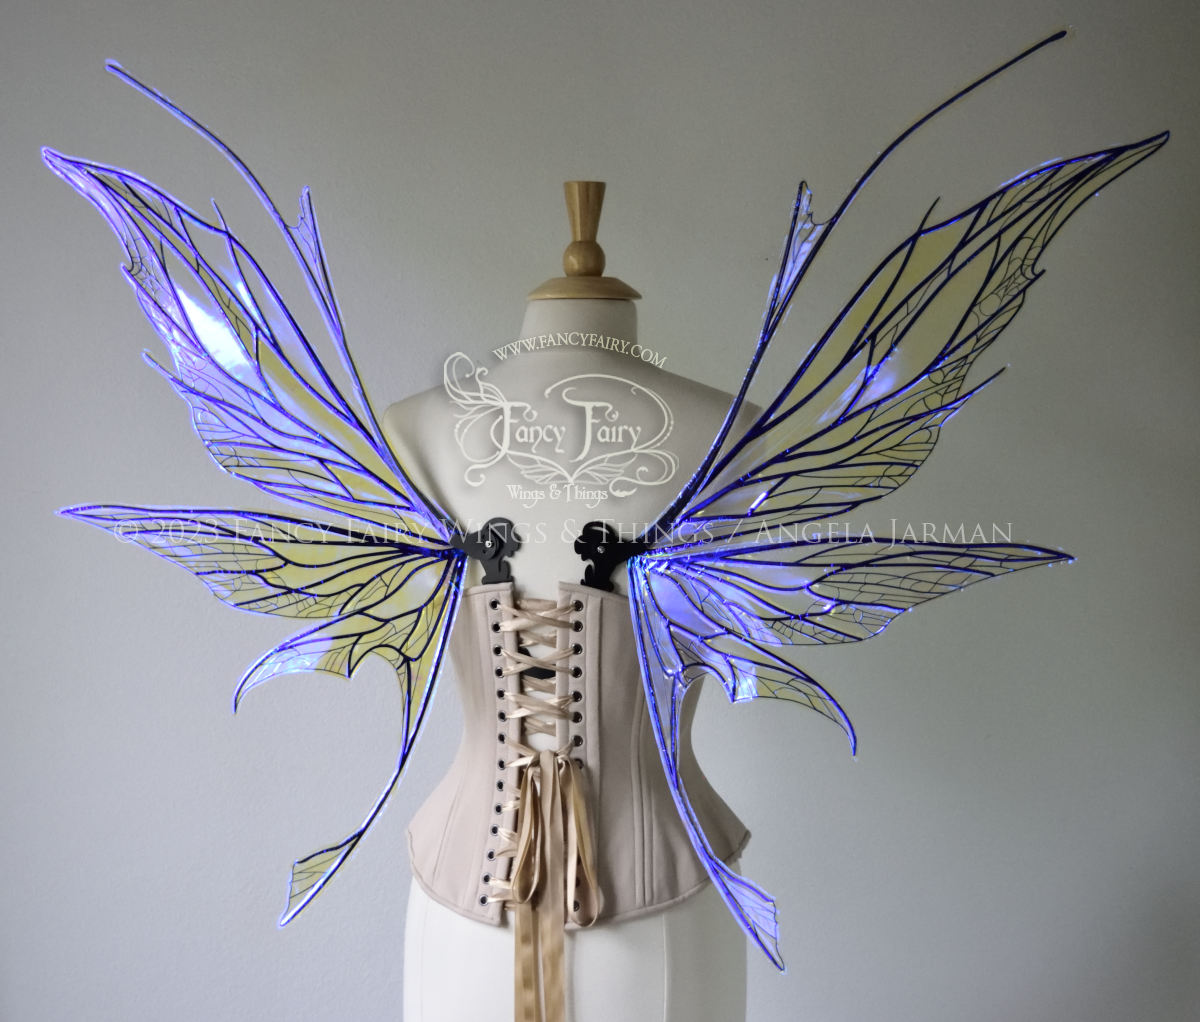 Back view of a dress form wearing an underbust corset & large violet iridescent fairy wings with antennae, black veins, spikey shapes